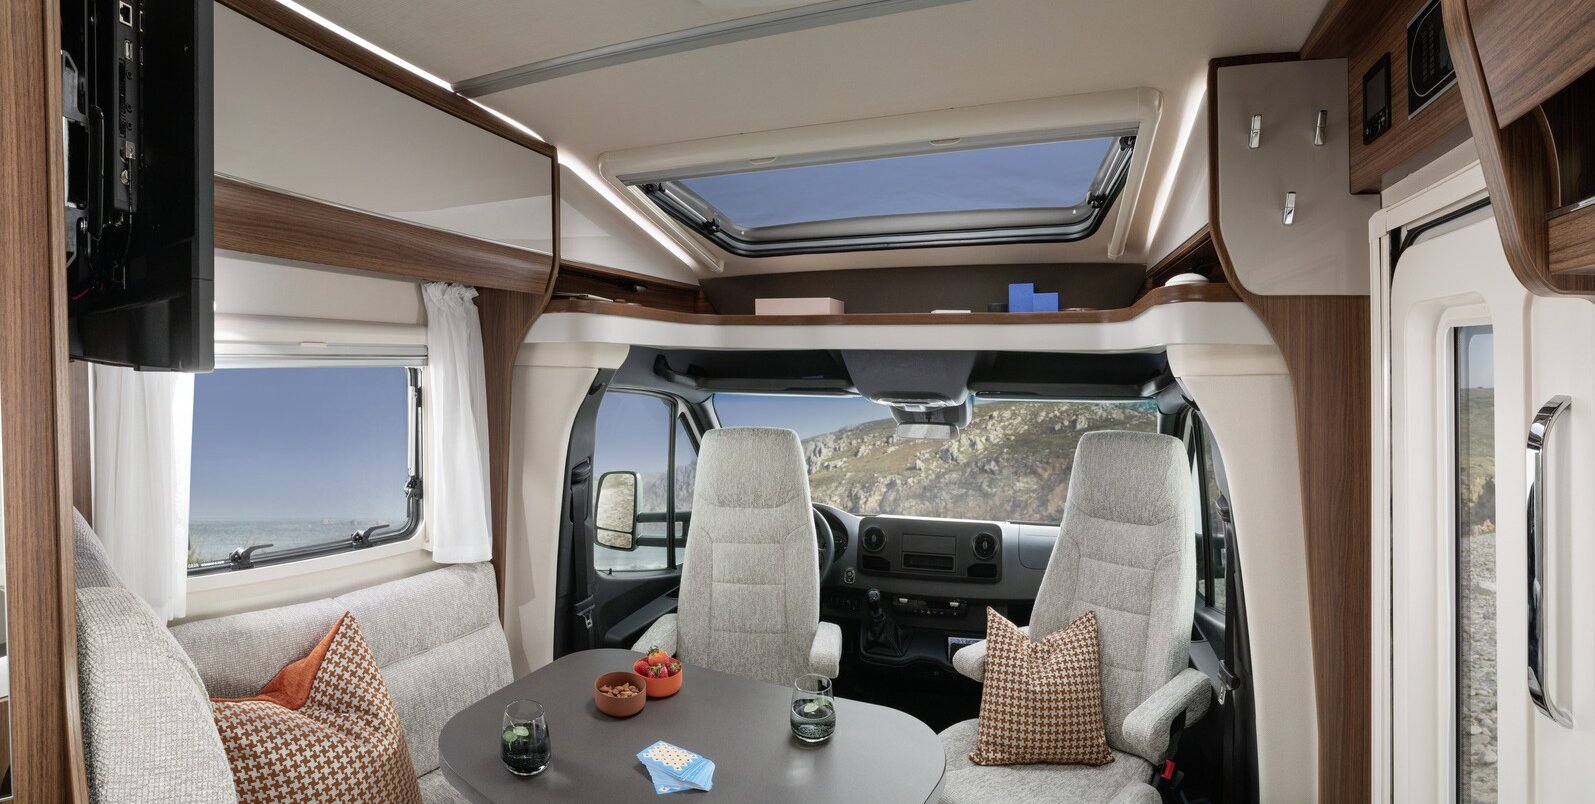 Living room in the HYMER ML-T: seating area with cushions, laid table, entrance door, panoramic roof vent, driver's seats, storage board